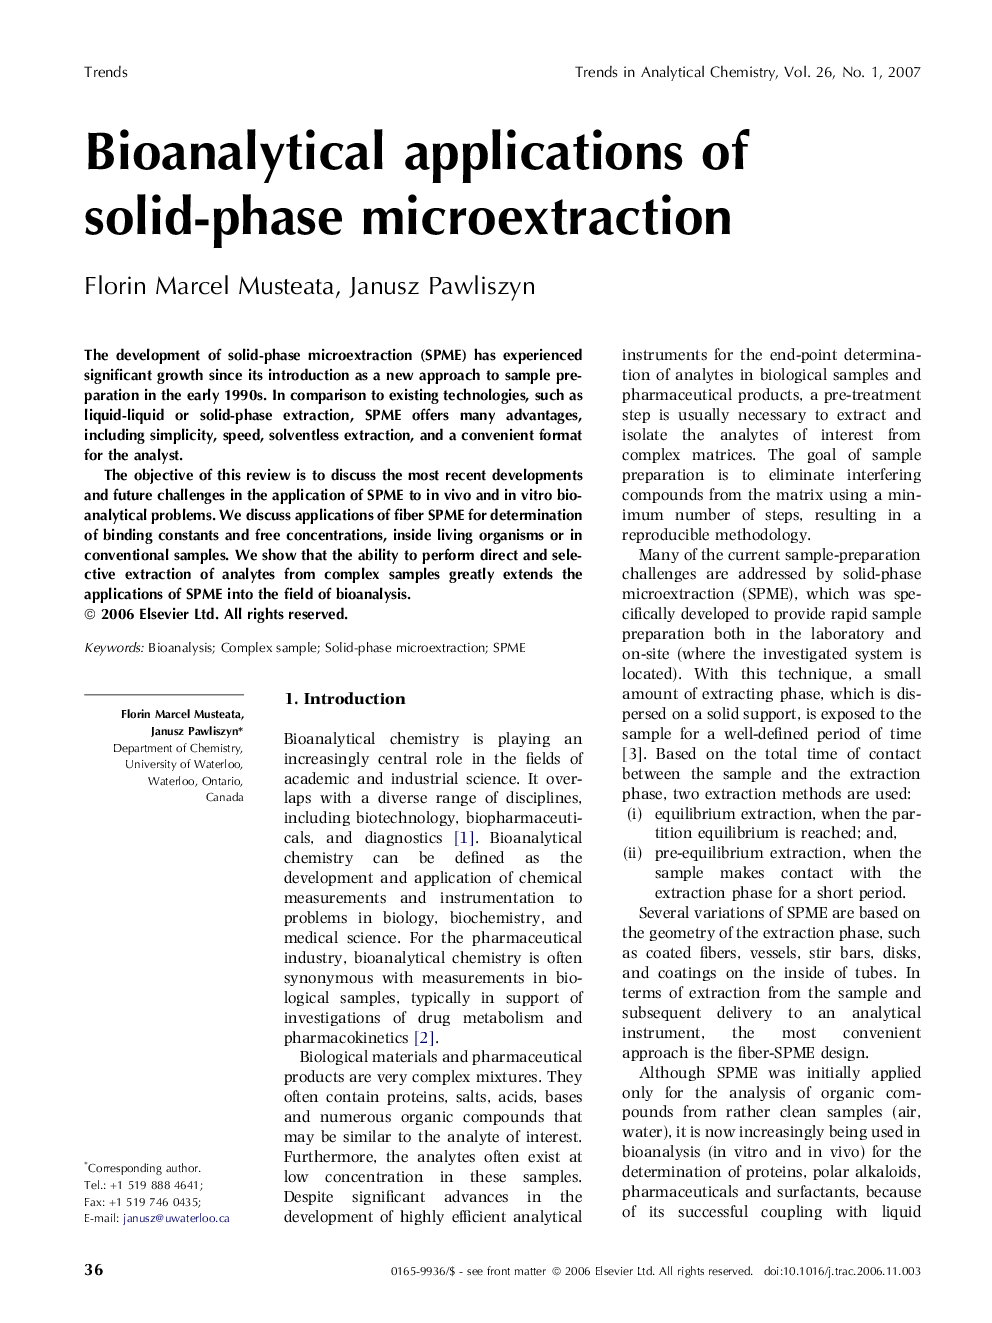 Bioanalytical applications of solid-phase microextraction